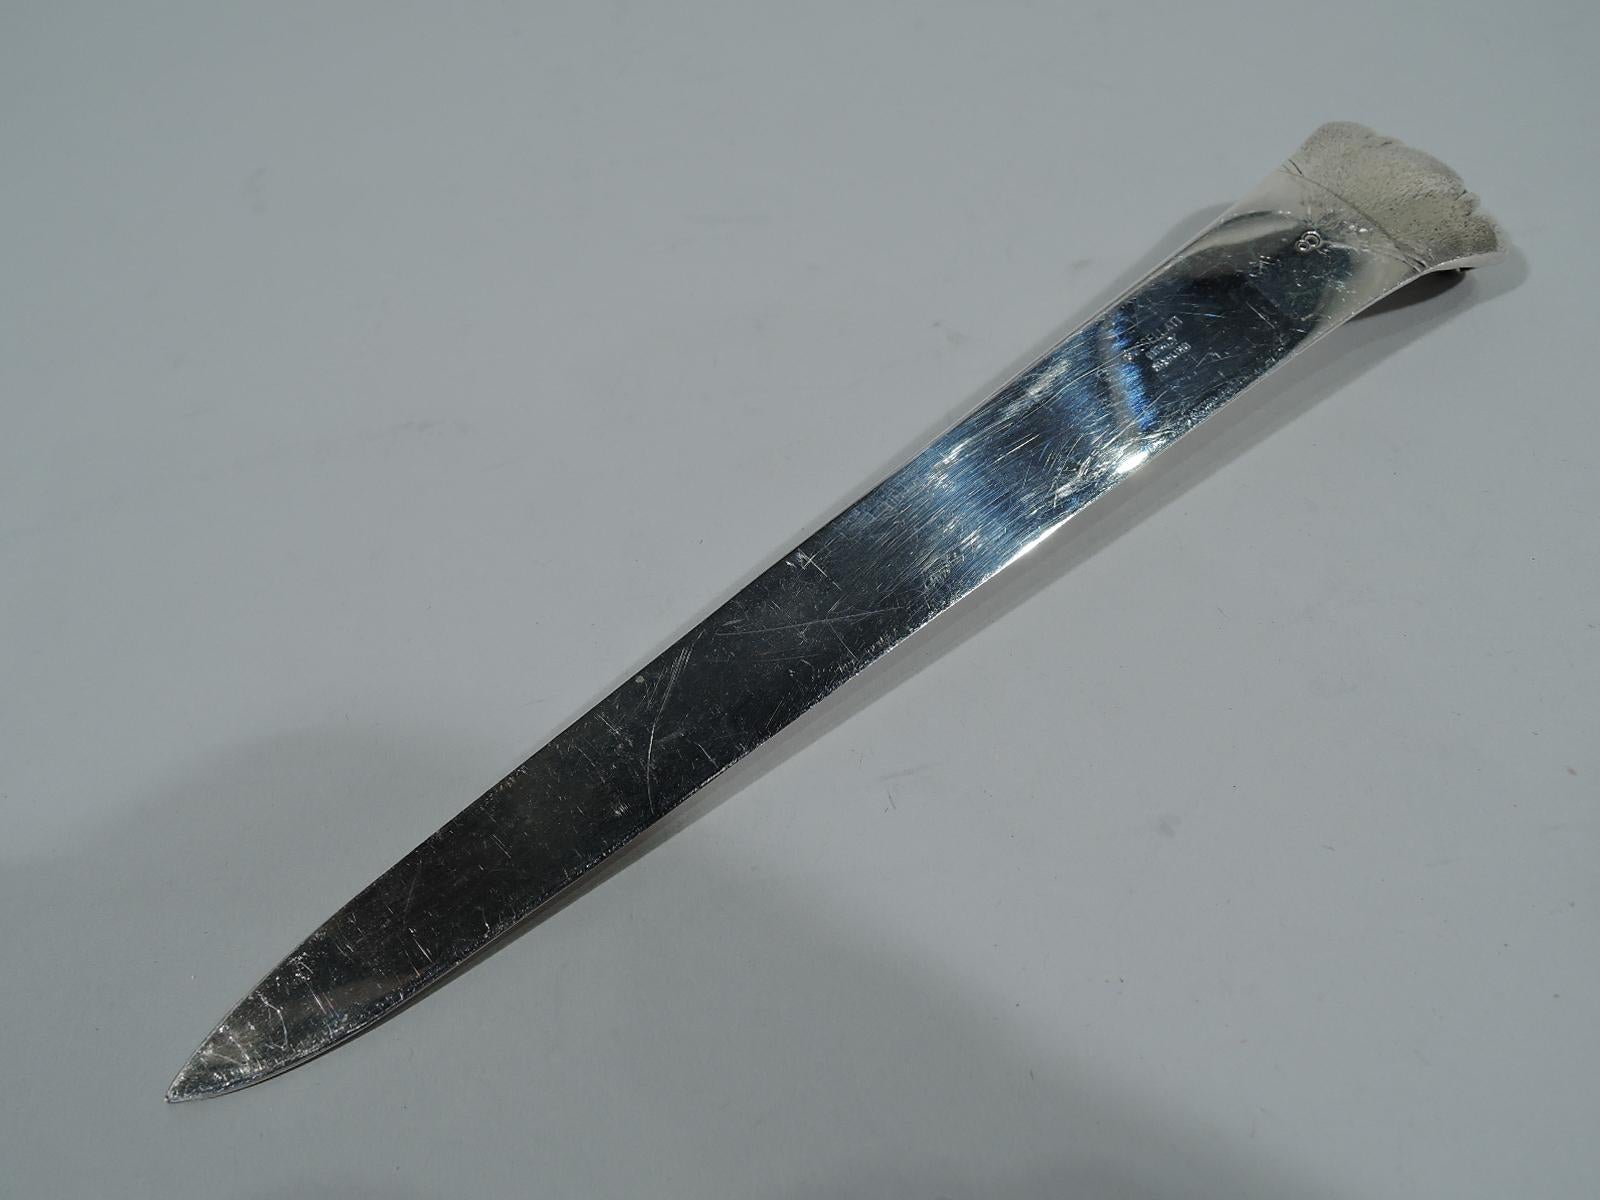 Chic sterling silver letter opener. Made by Buccellati in Italy. Tapering blade and dynamic scrolled terminal with striation and feathering. A smart desk accessory for paying bills with panache. Hallmark and no. 8. Weight: 2.5 troy ounces.